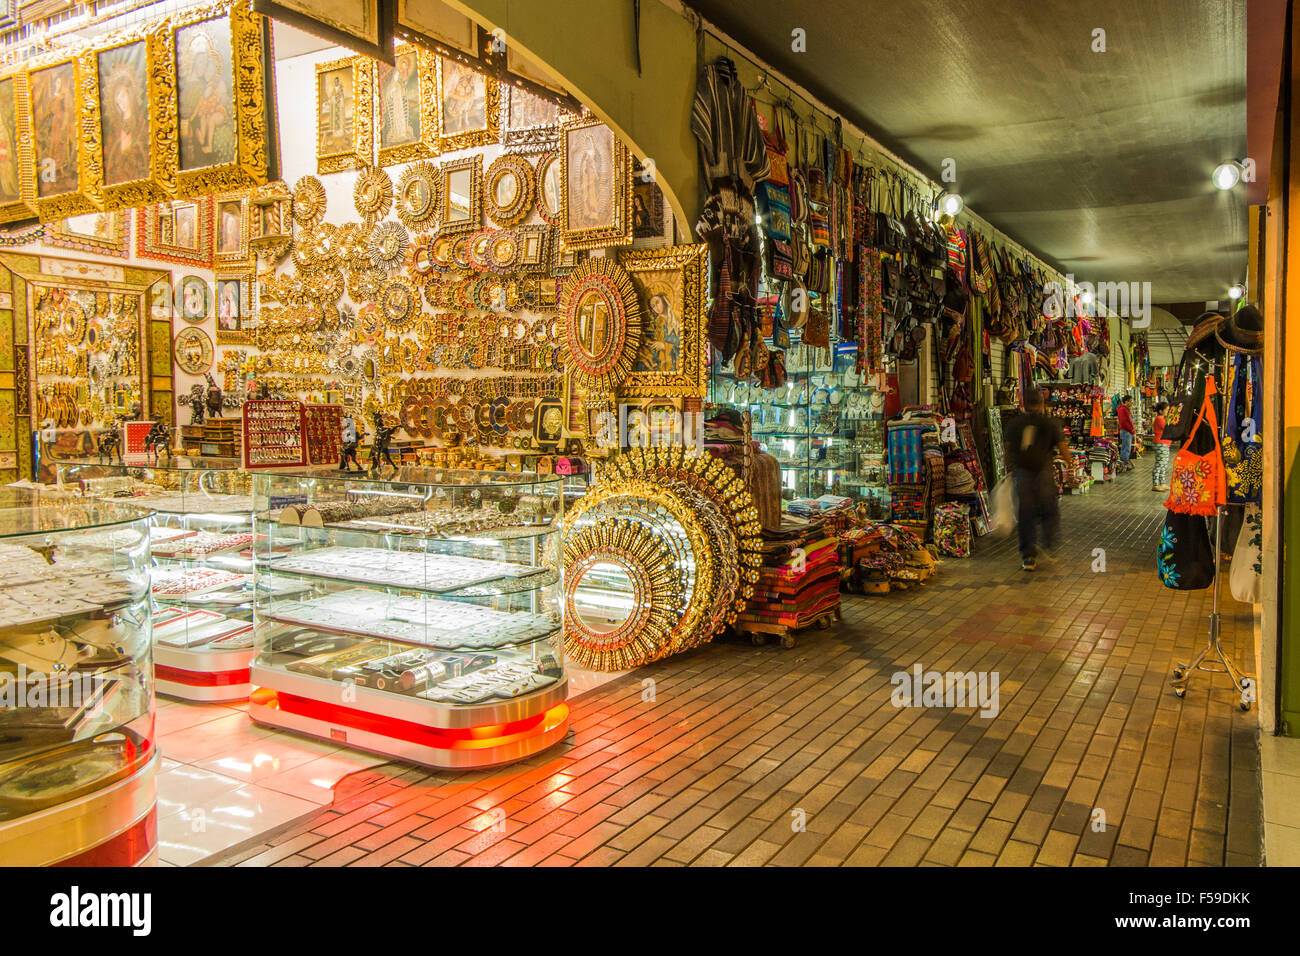 Typical Peruvian souvenirs and crafts on sale at the Inka Market in Miraflores in central Lima, Peru Stock Photo